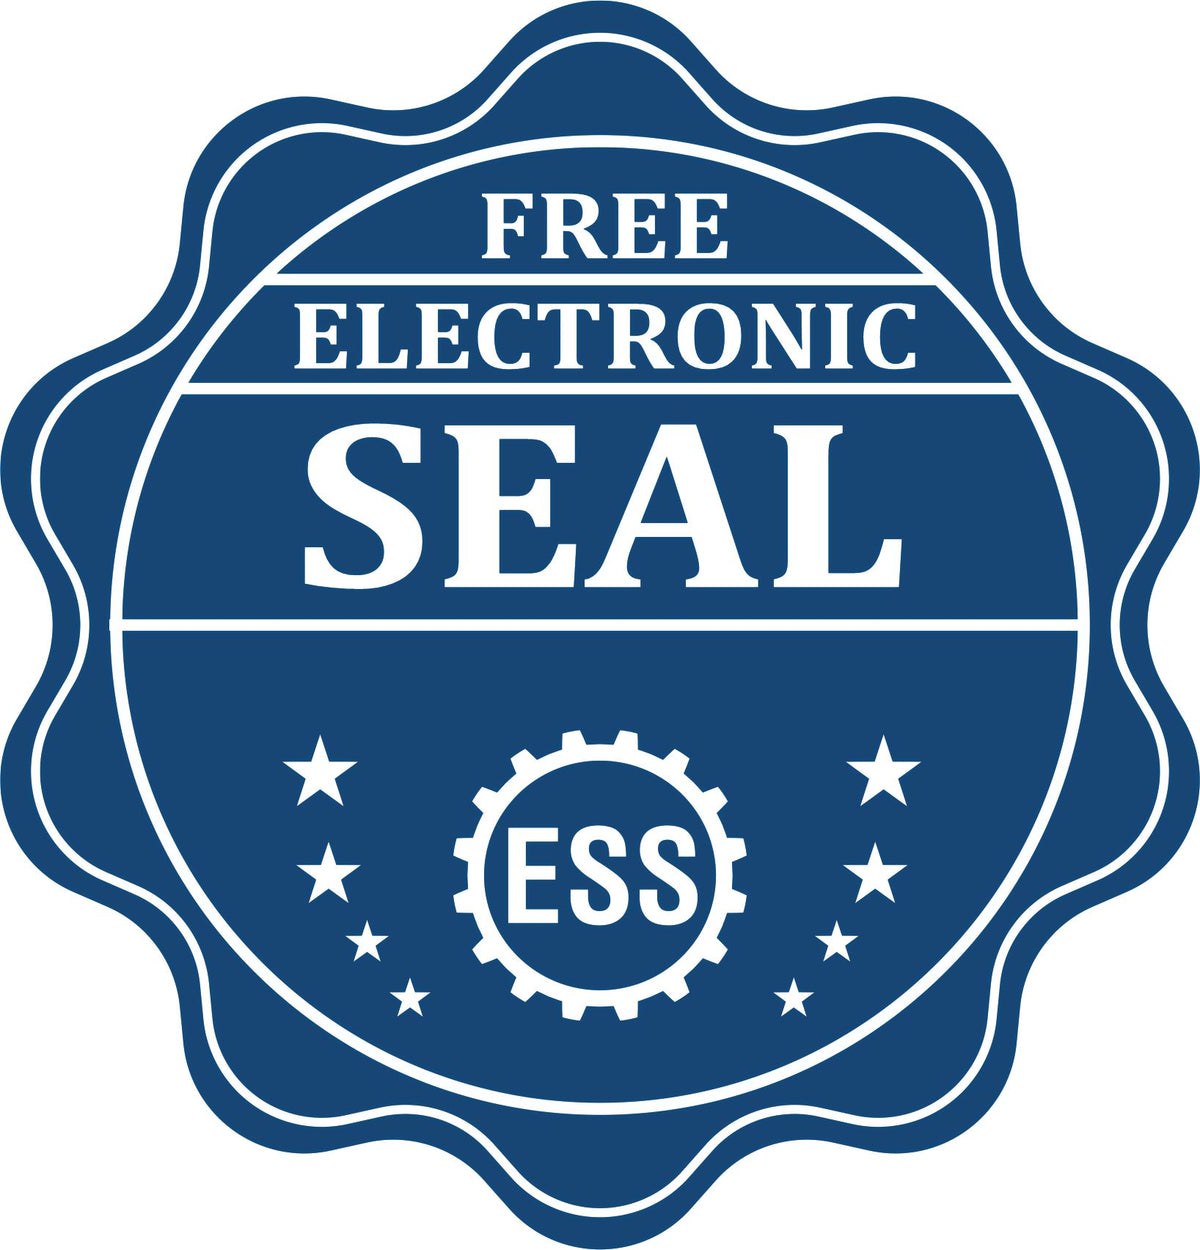 A badge showing a free electronic seal for the Hybrid Oregon Geologist Seal with stars and the ESS gear on the emblem.